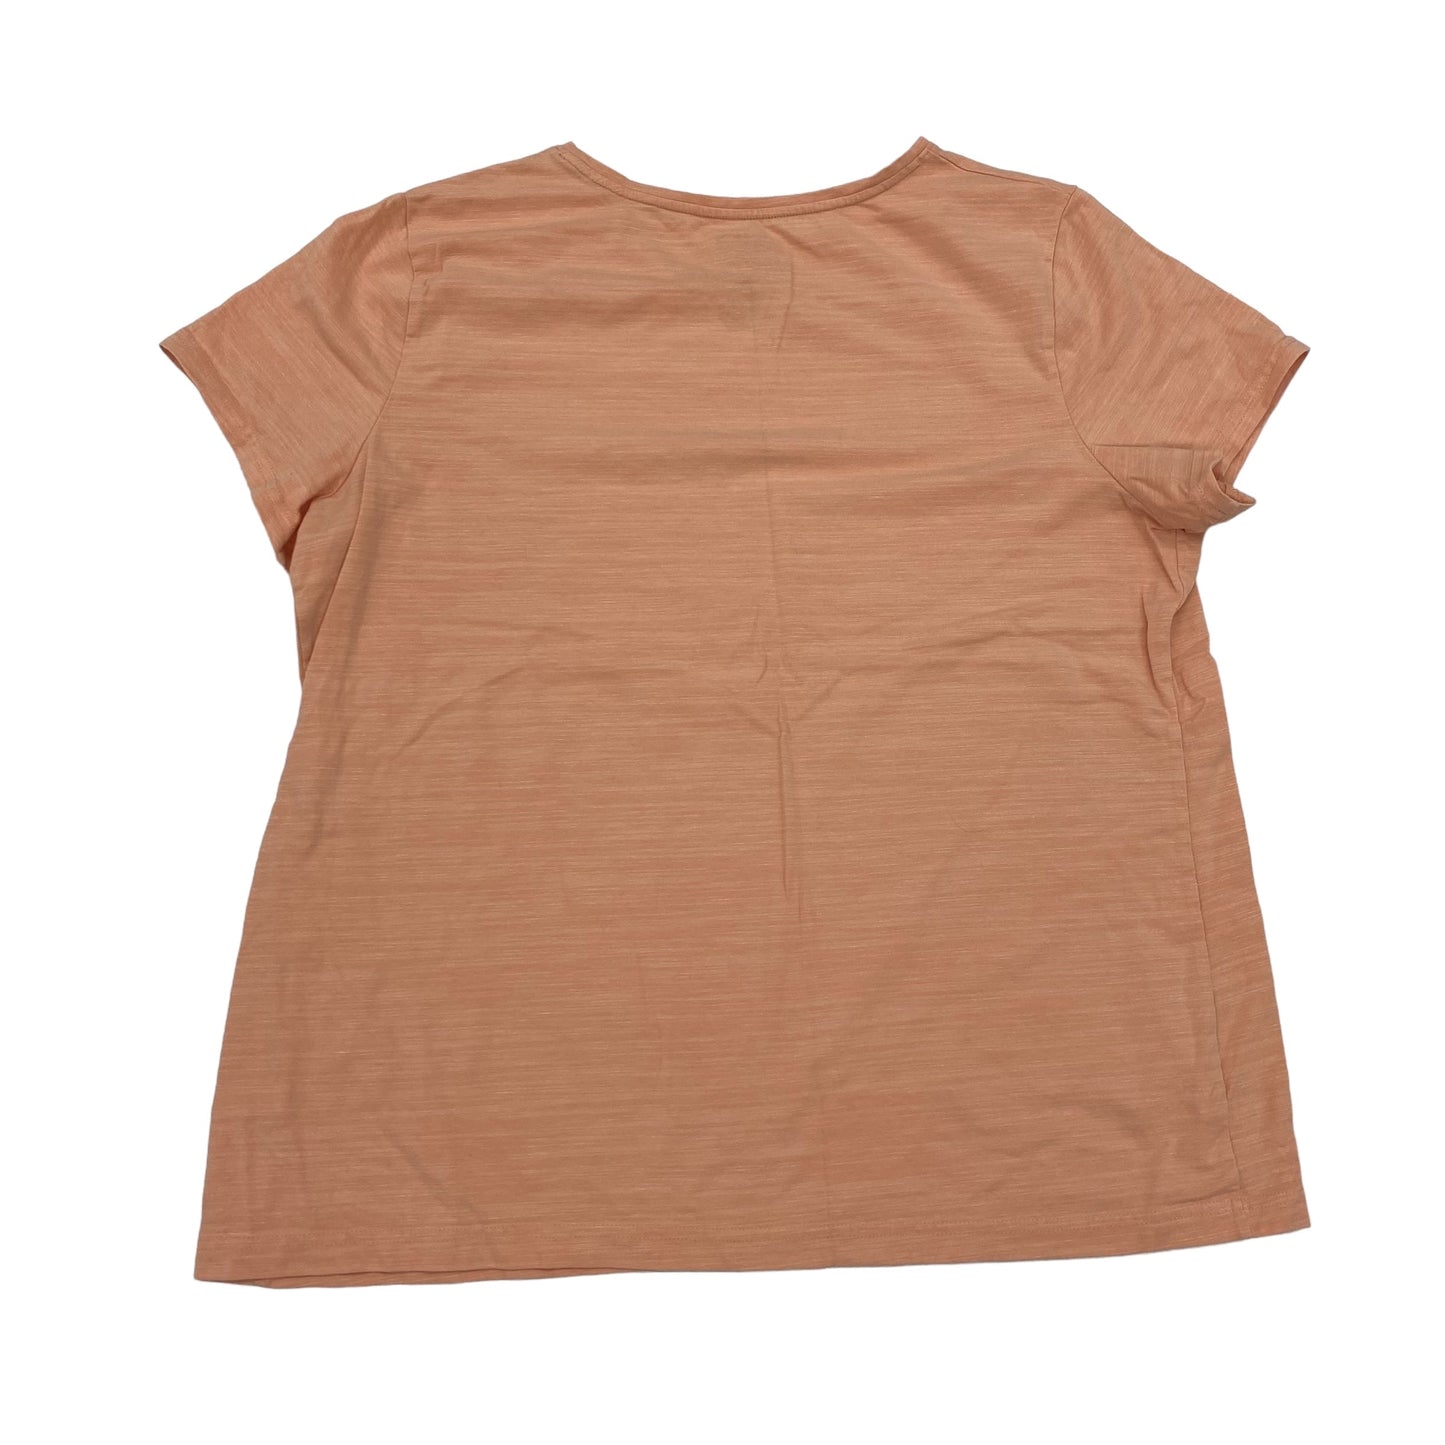 ORANGE TOP SS BASIC by CROFT AND BARROW Size:XL